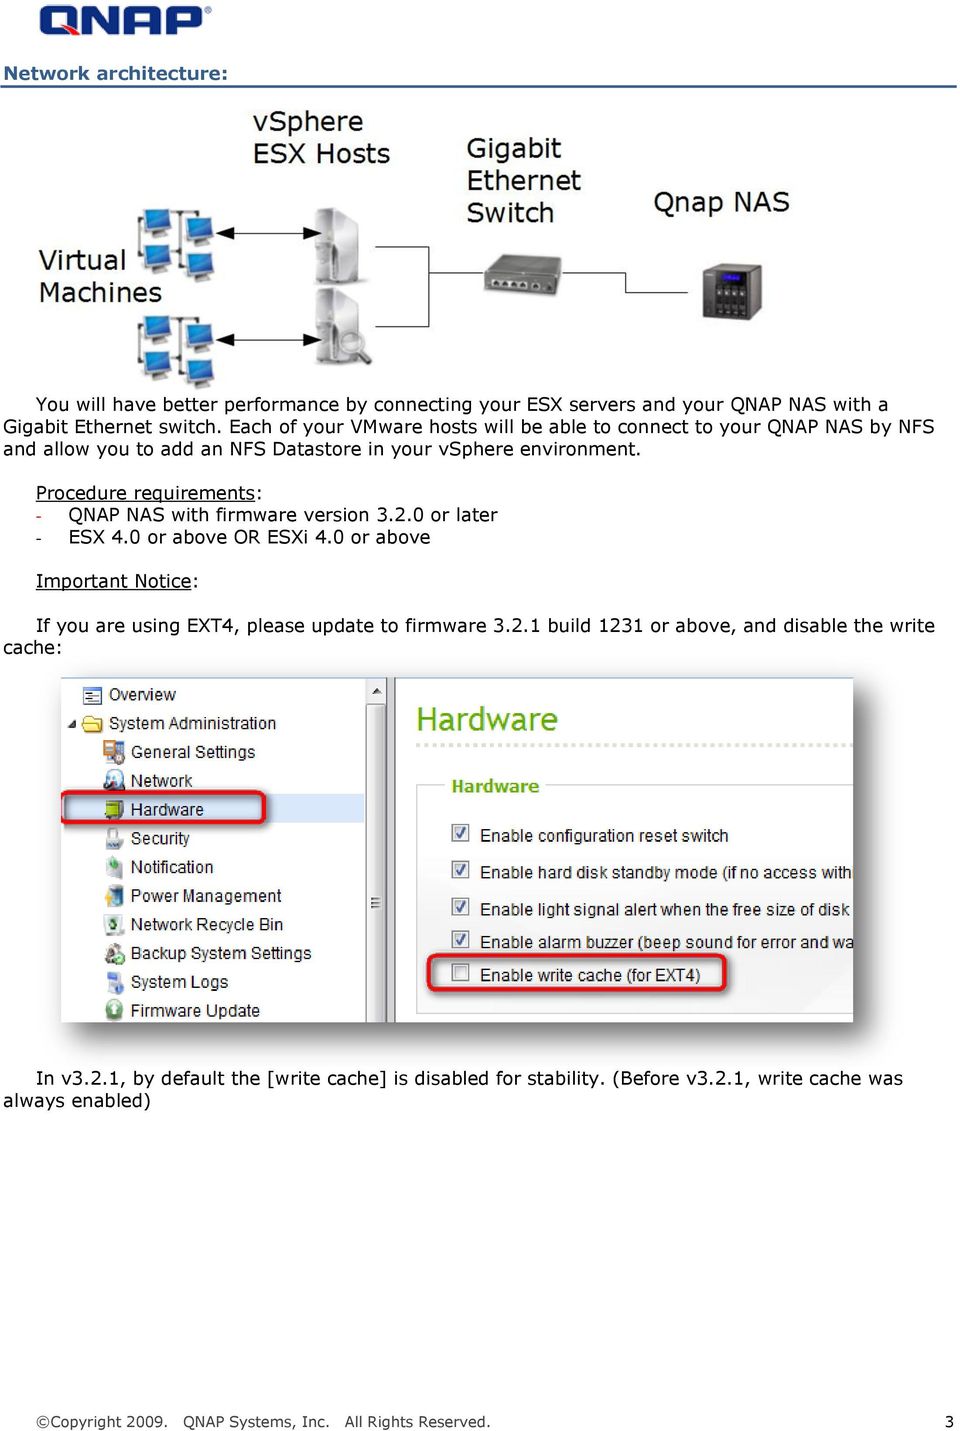 Procedure requirements: - QNAP NAS with firmware version 3.2.0 or later - ESX 4.0 or above OR ESXi 4.